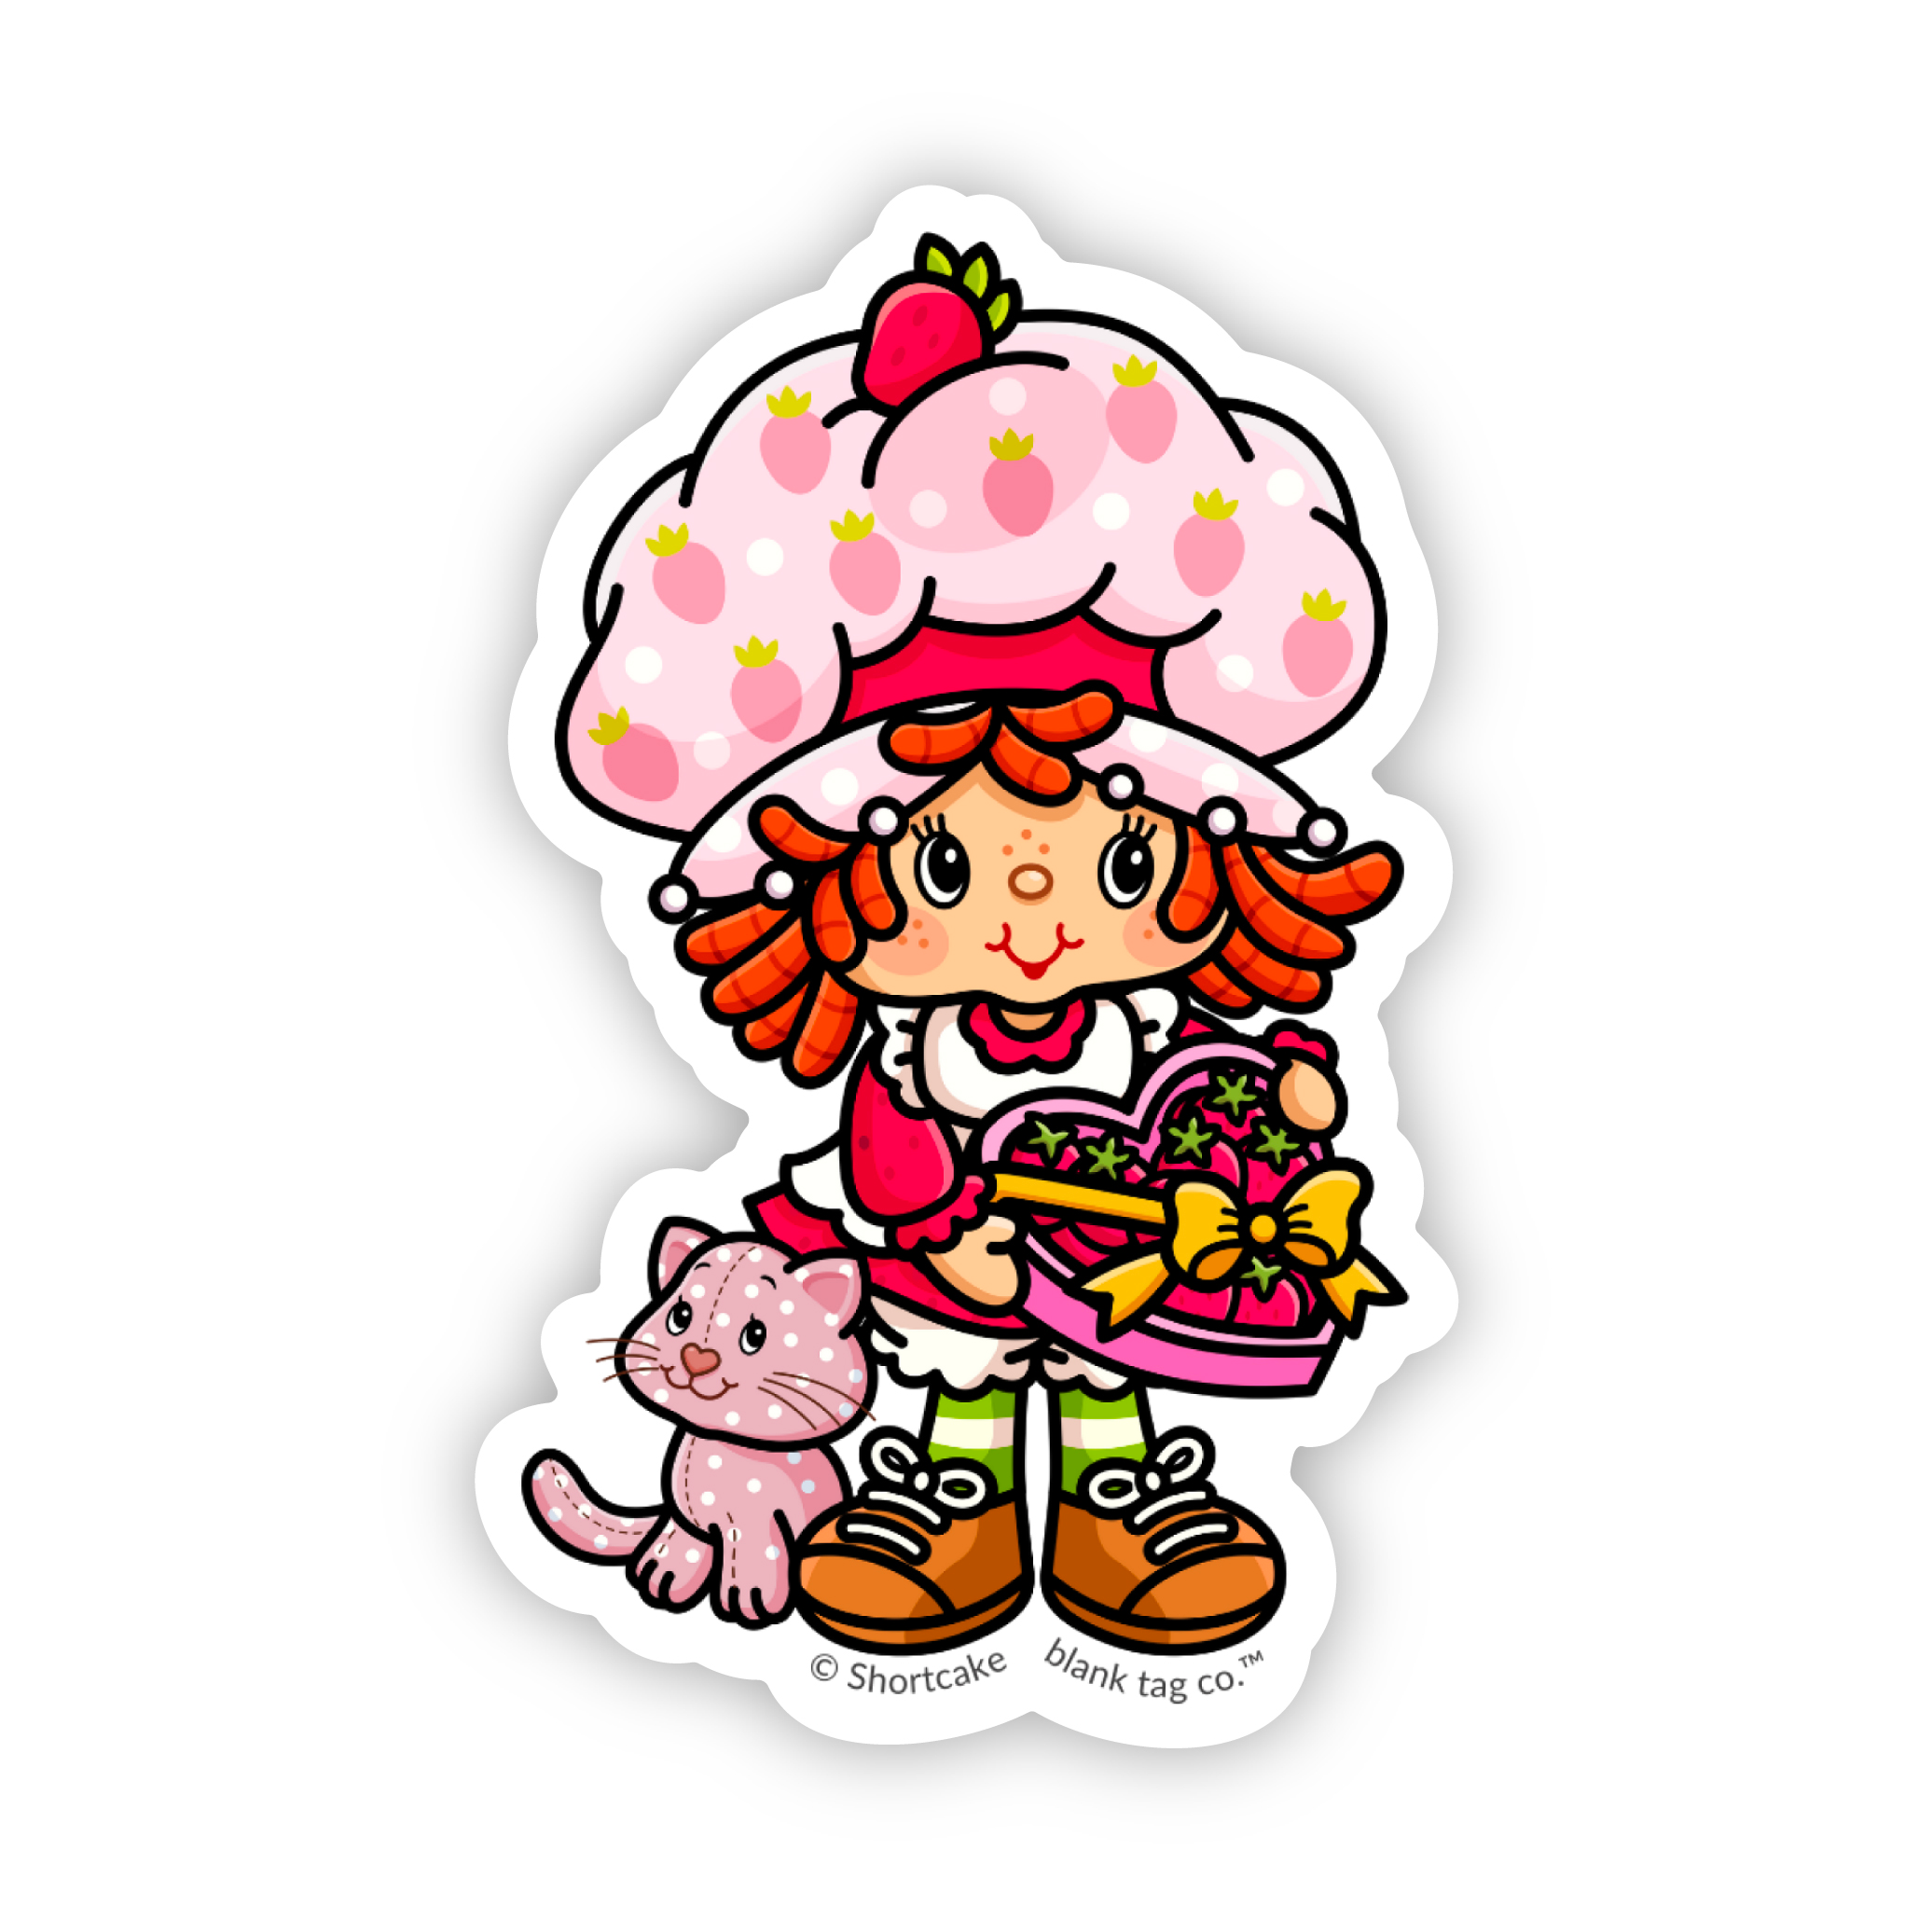 The Strawberry Shortcake With A Box of Strawberries Sticker